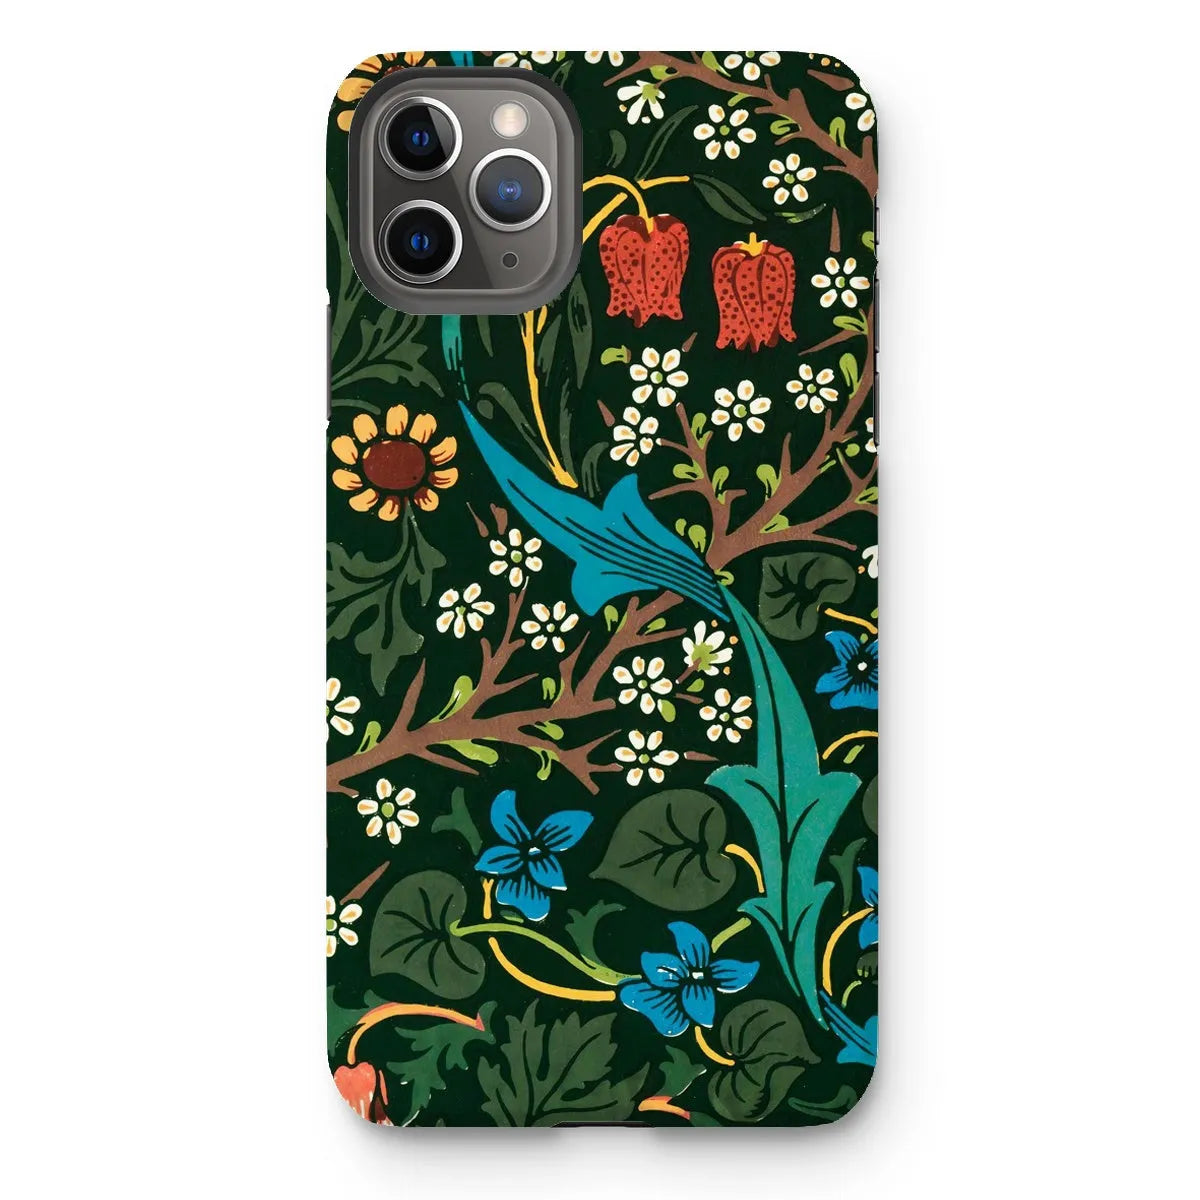 Blackthorn Hawthorn - Floral Phone Case - William Morris - Iphone 11 Pro Max / Matte - Mobile Phone Cases - Aesthetic